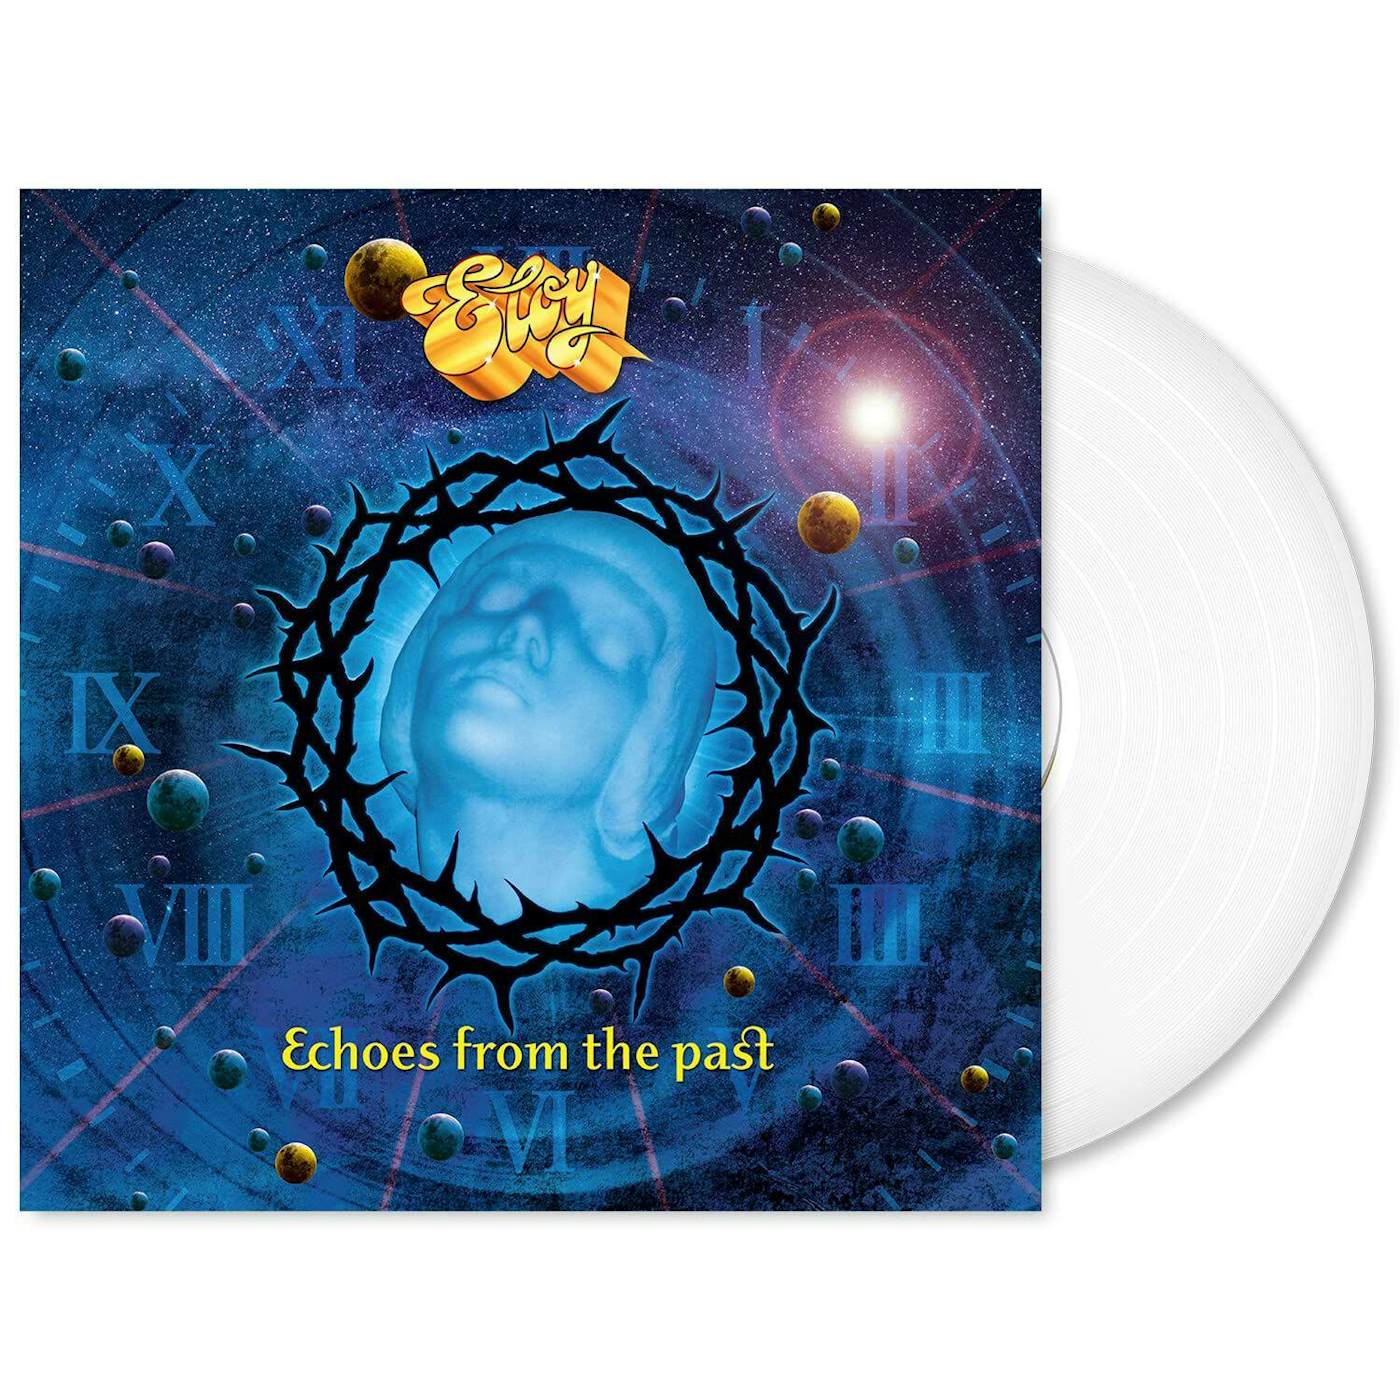 Eloy Echoes From The Past (White Vinyl Record)